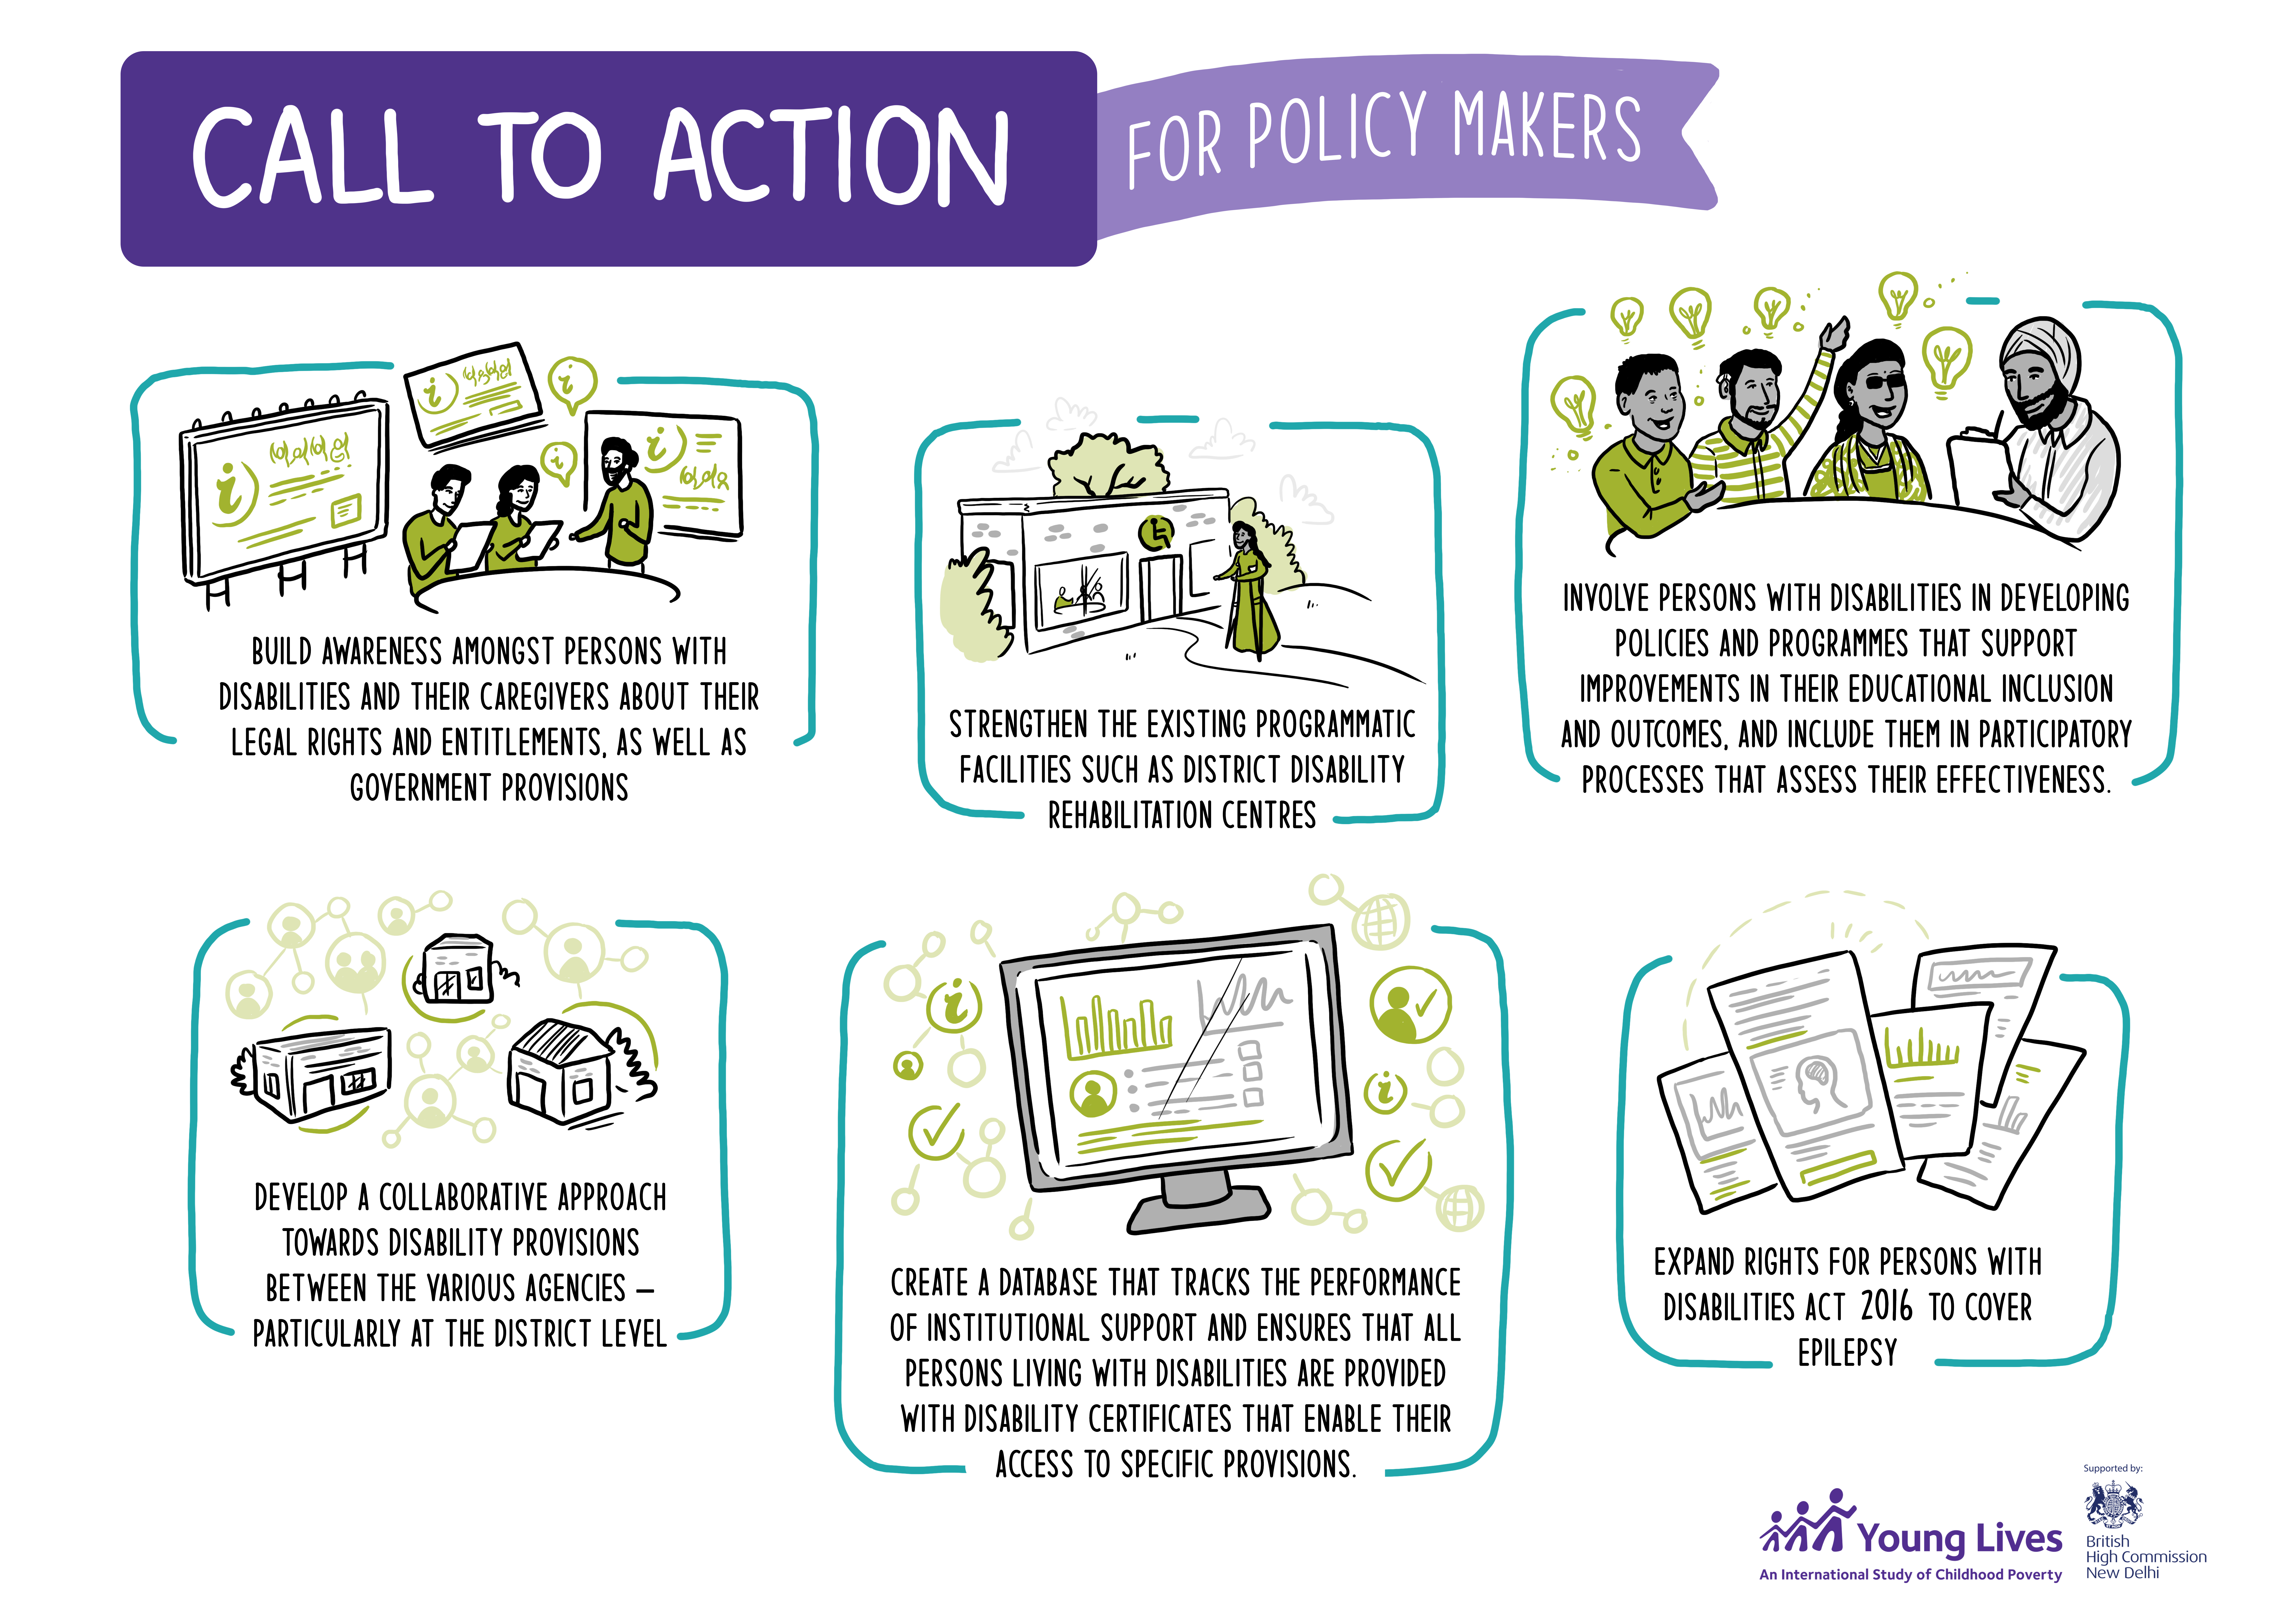 Call to action illustration